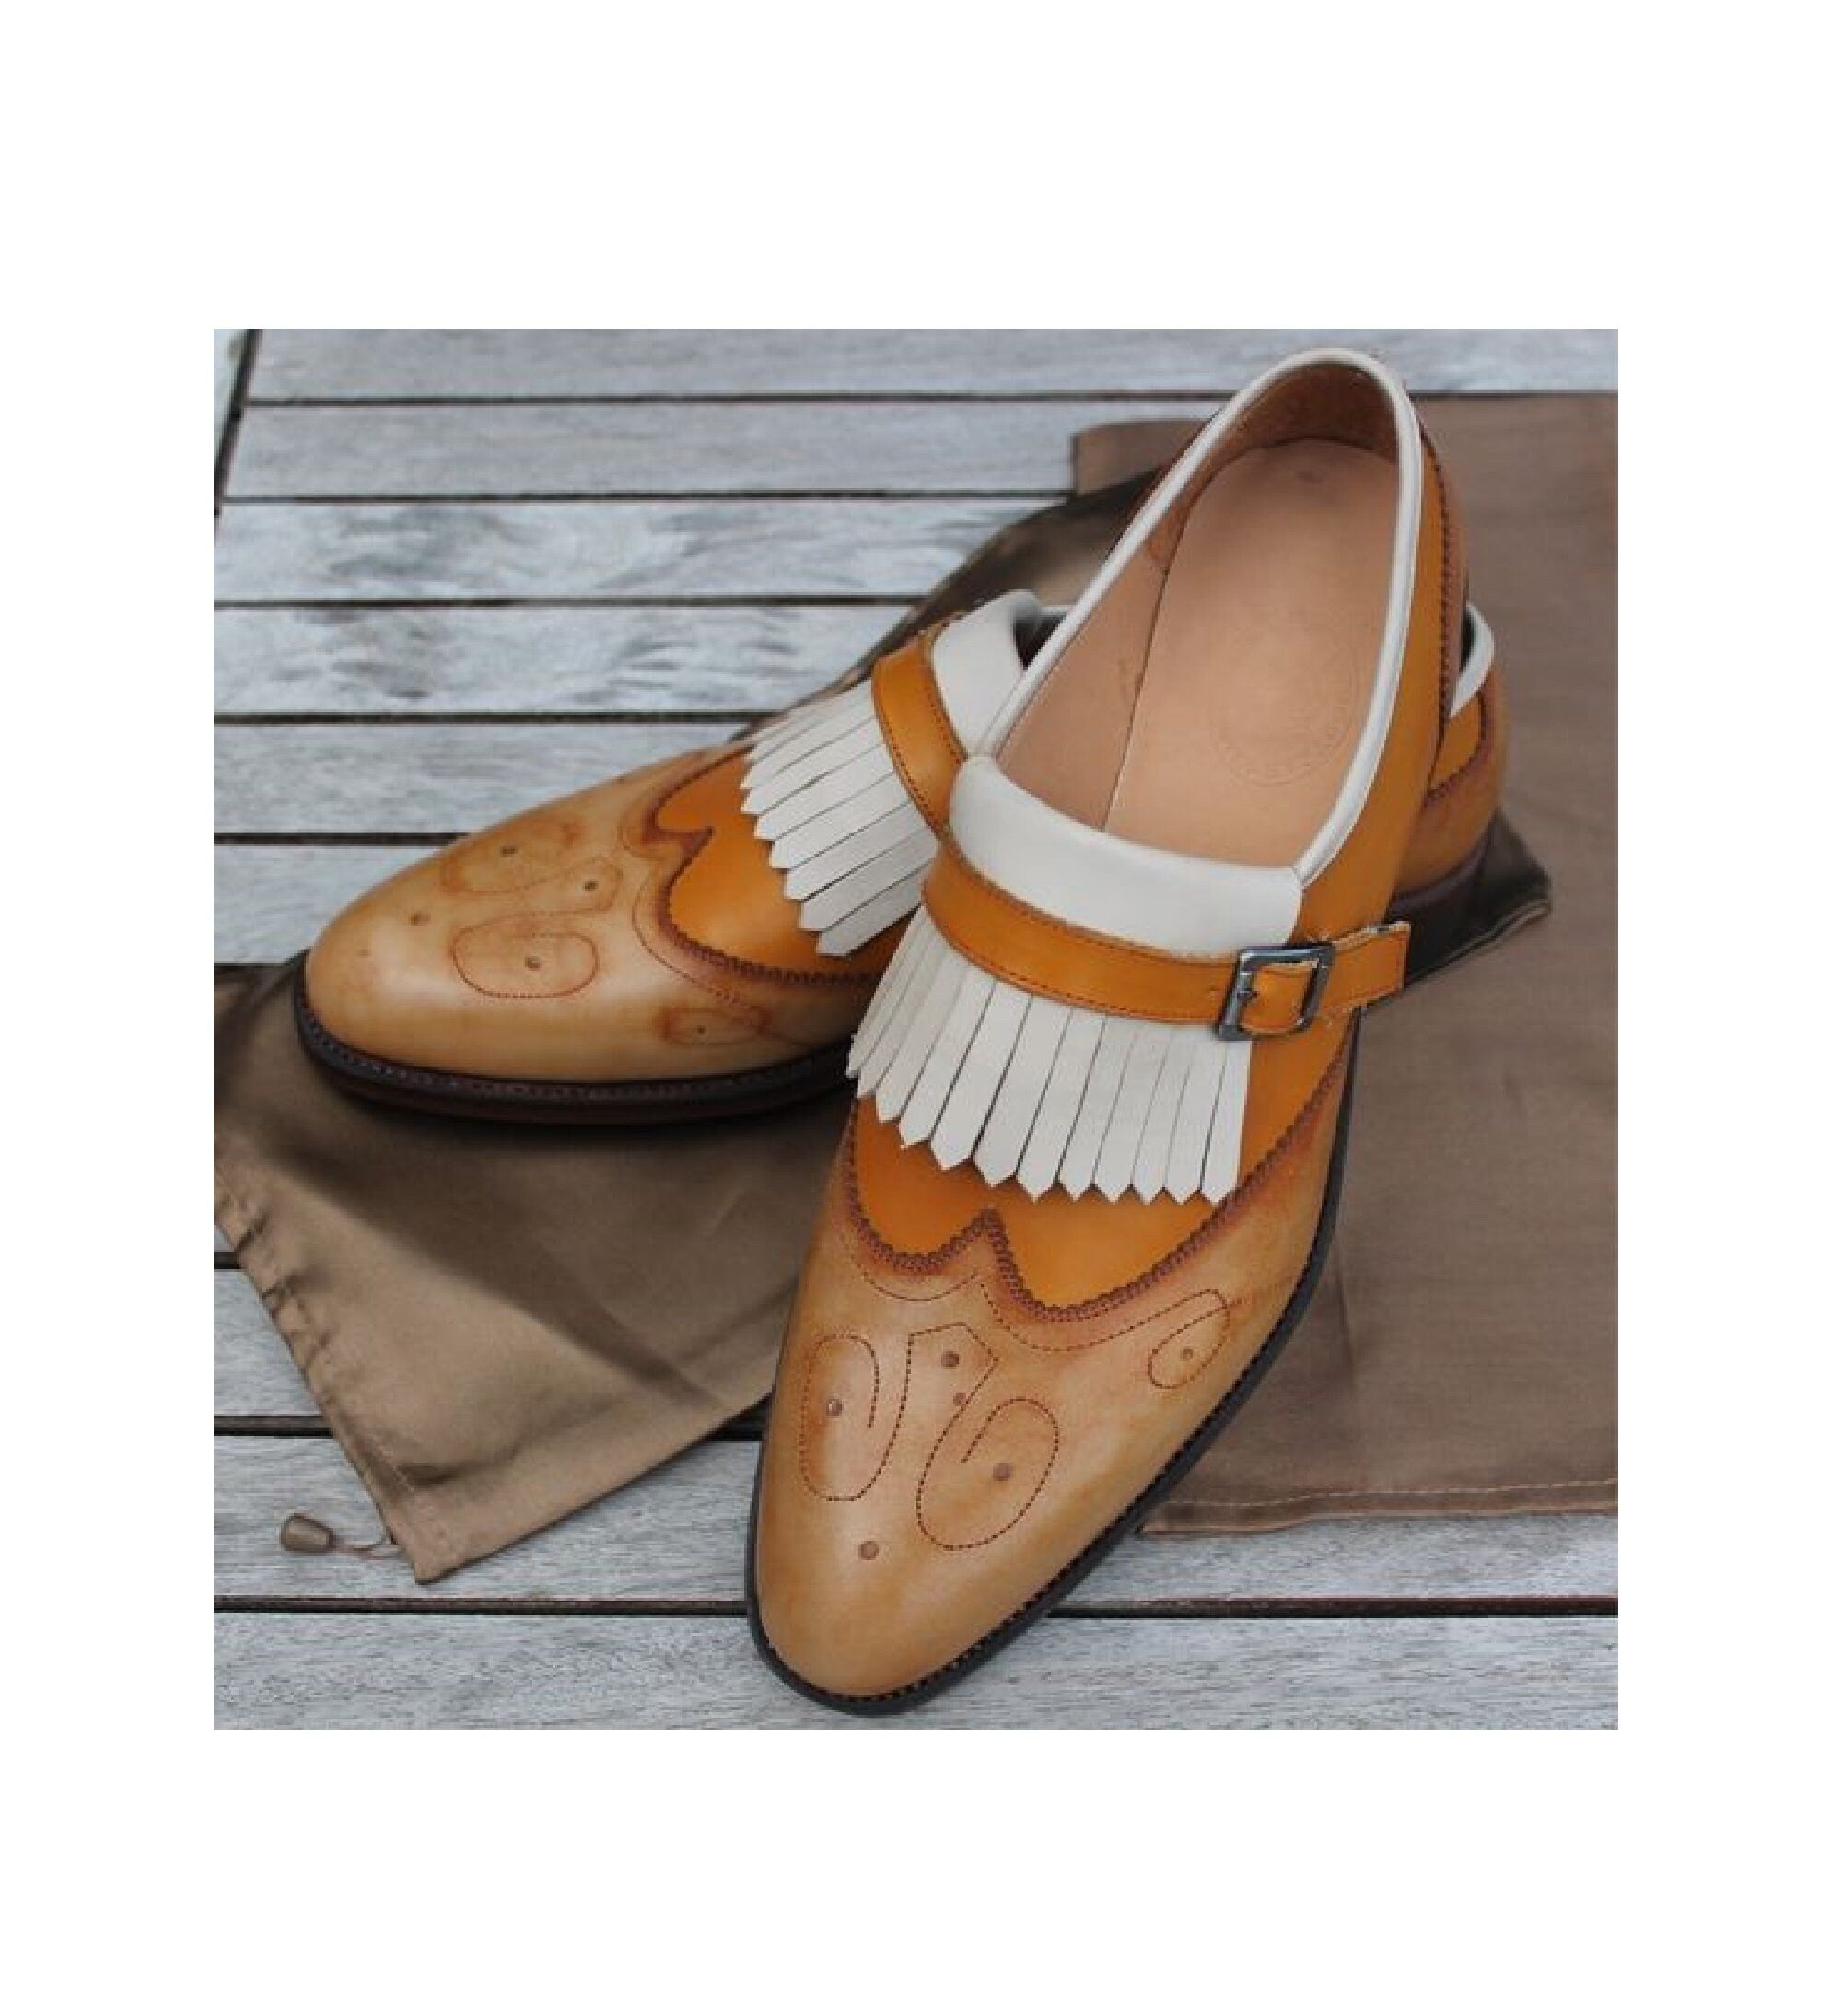 Unique Multi Leather Skin Hand Made Wingtip Monk Strap Dress British Style Shoes, Moccasin Shoes, Brogue Shoes